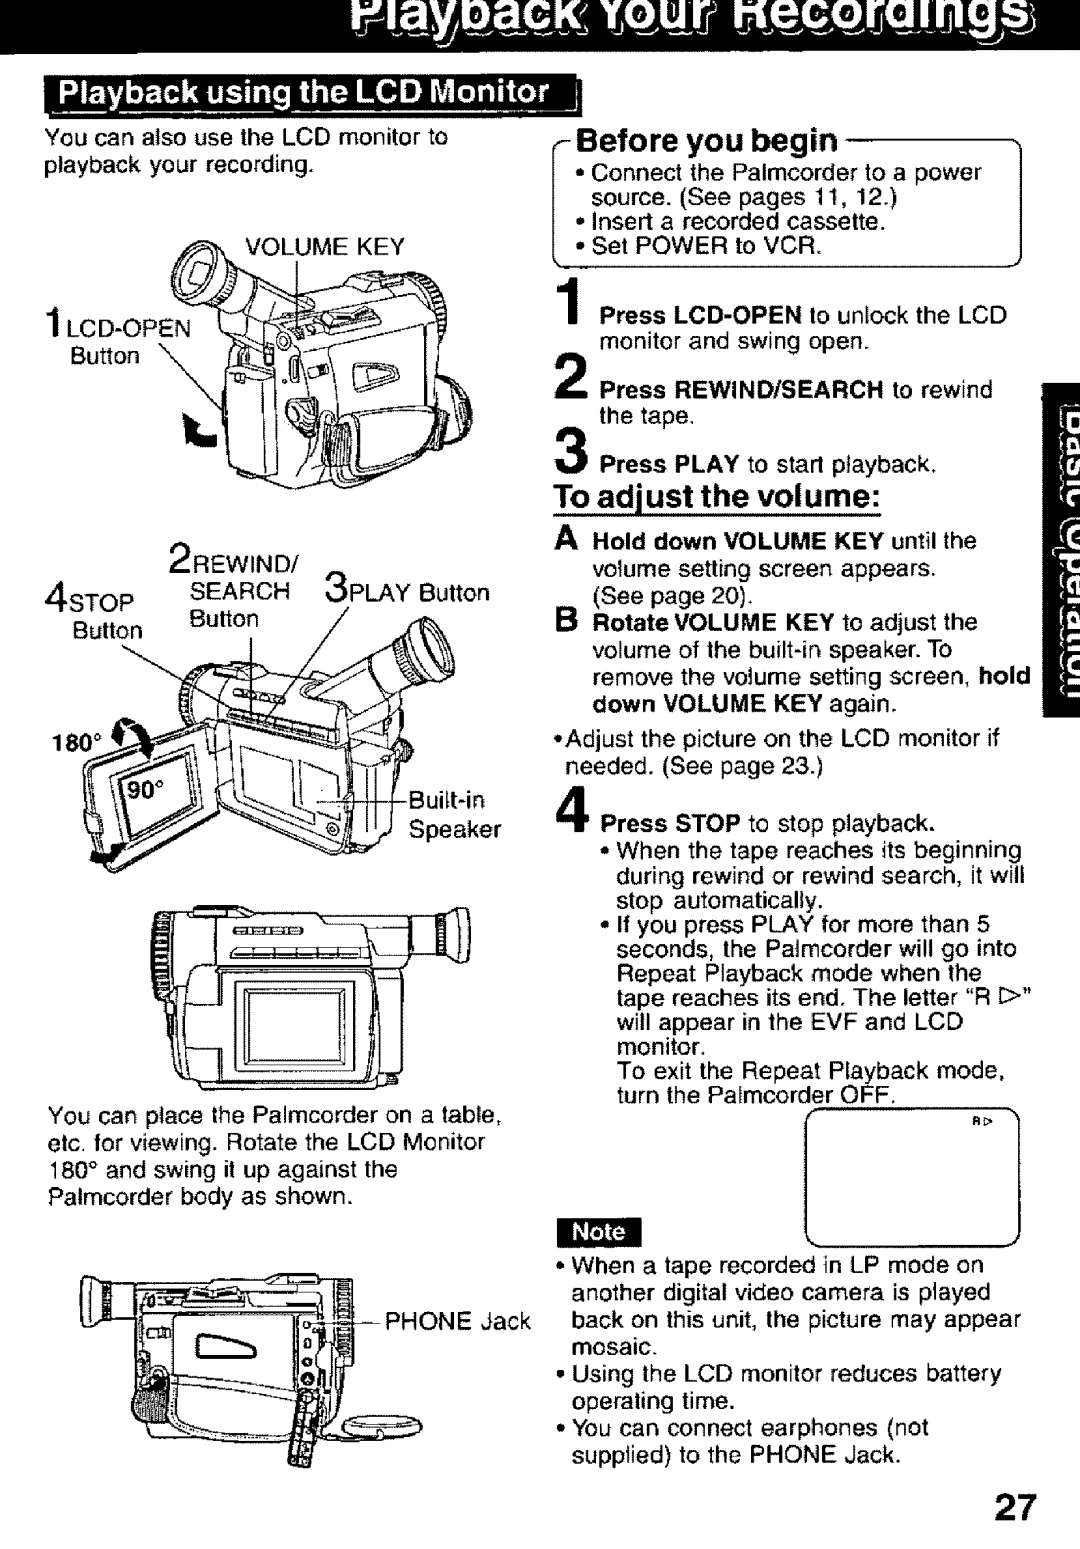 Panasonic PV-DV101 manual Before you begin, To adjust the volume, 2REWIND 4STOP SEARCH 3PLAY Button Button Button 